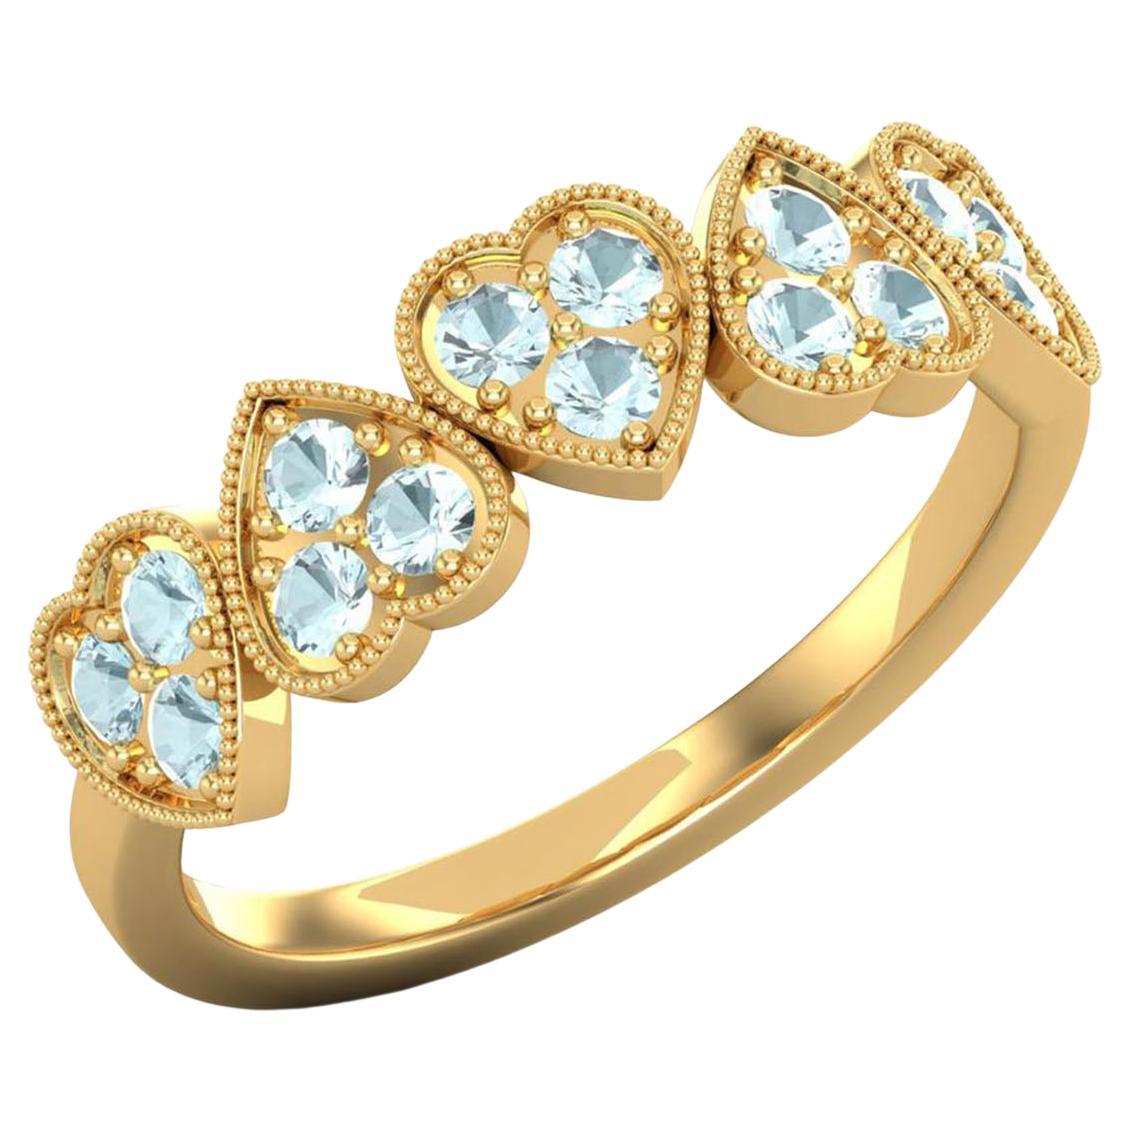 14 Karat Gold Aquamarine Ring / March Birthstone Ring / Heart Ring for Her For Sale